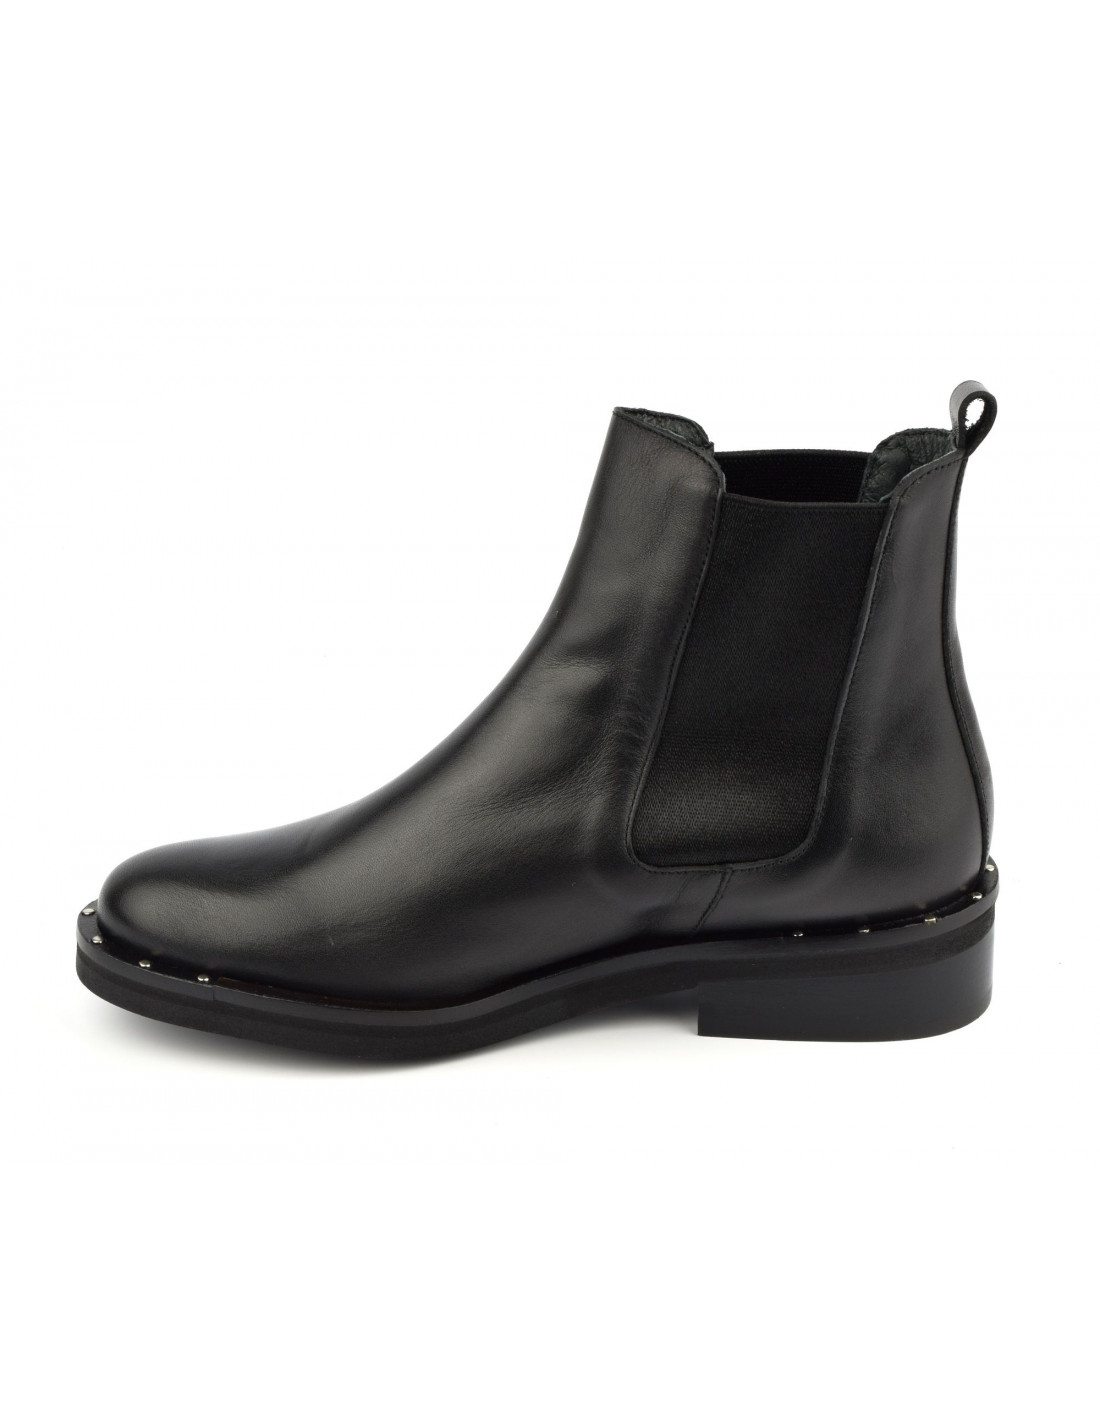 Chelsea boots, round toe, smooth black leather, 1752, Dansi